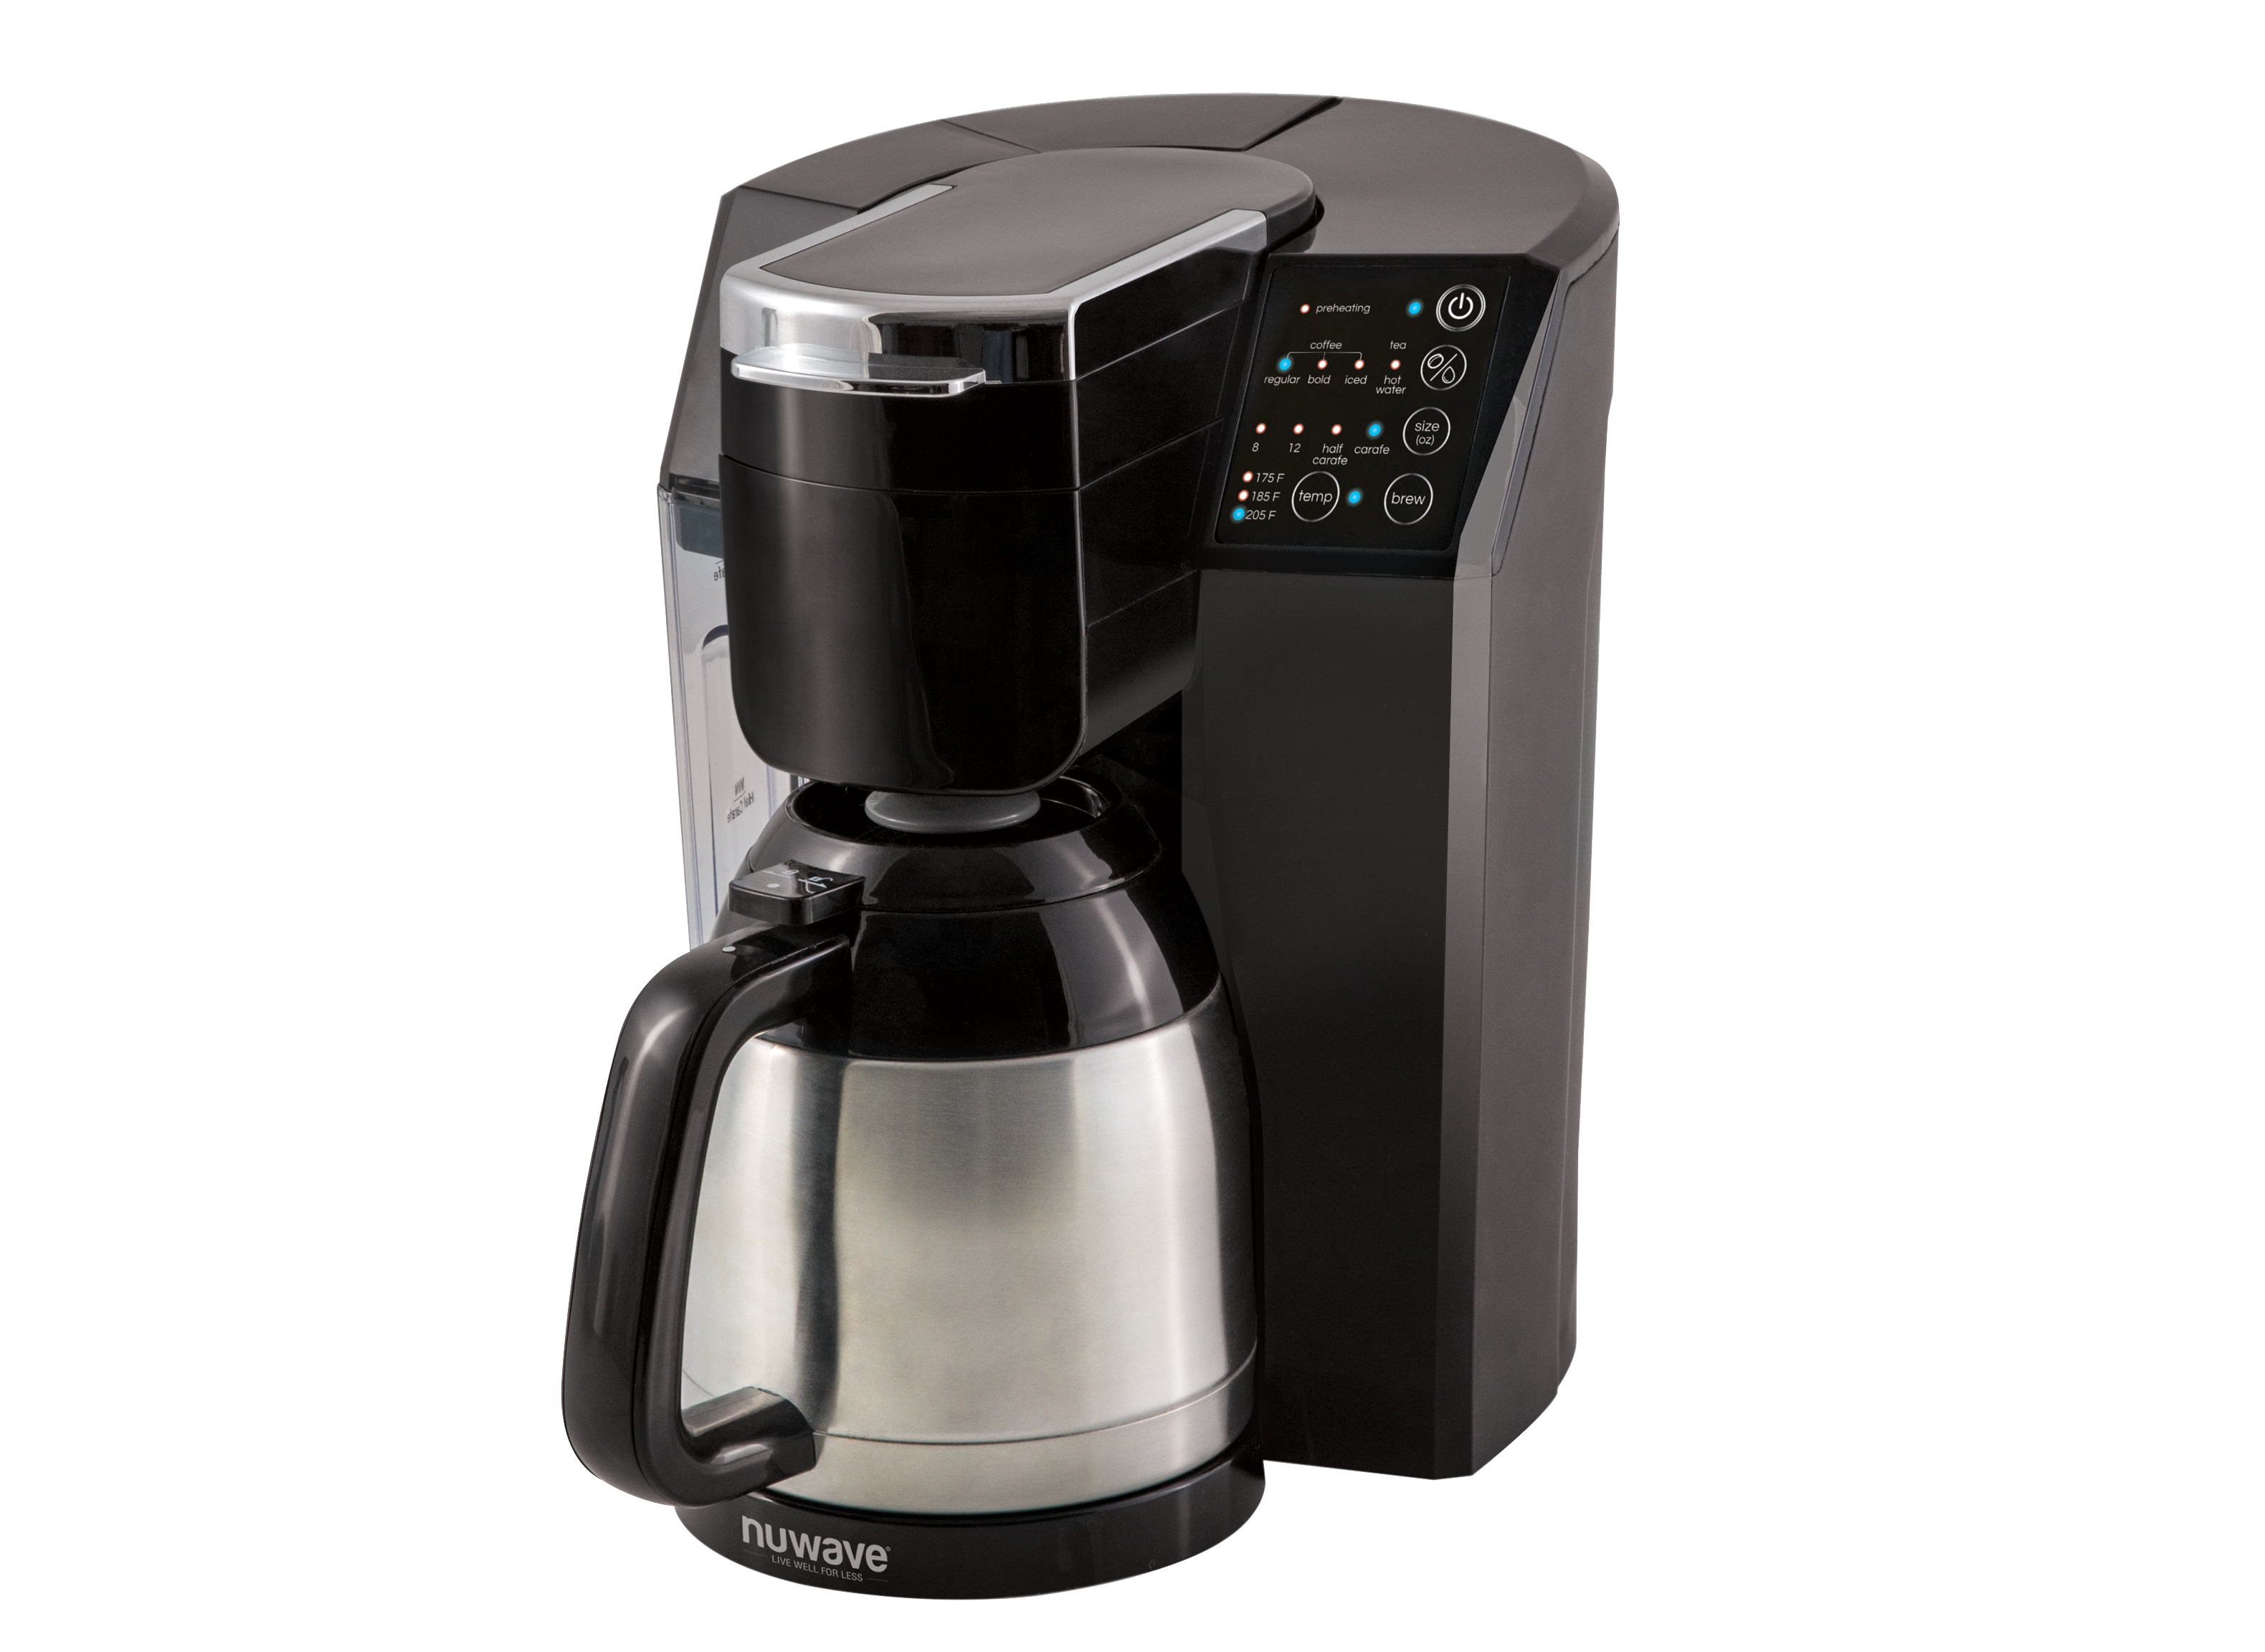 https://crdms.images.consumerreports.org/prod/products/cr/models/397212-drip-coffee-makers-with-carafe-nu-wave-bruhub-3-in-1-45001-10001365.png